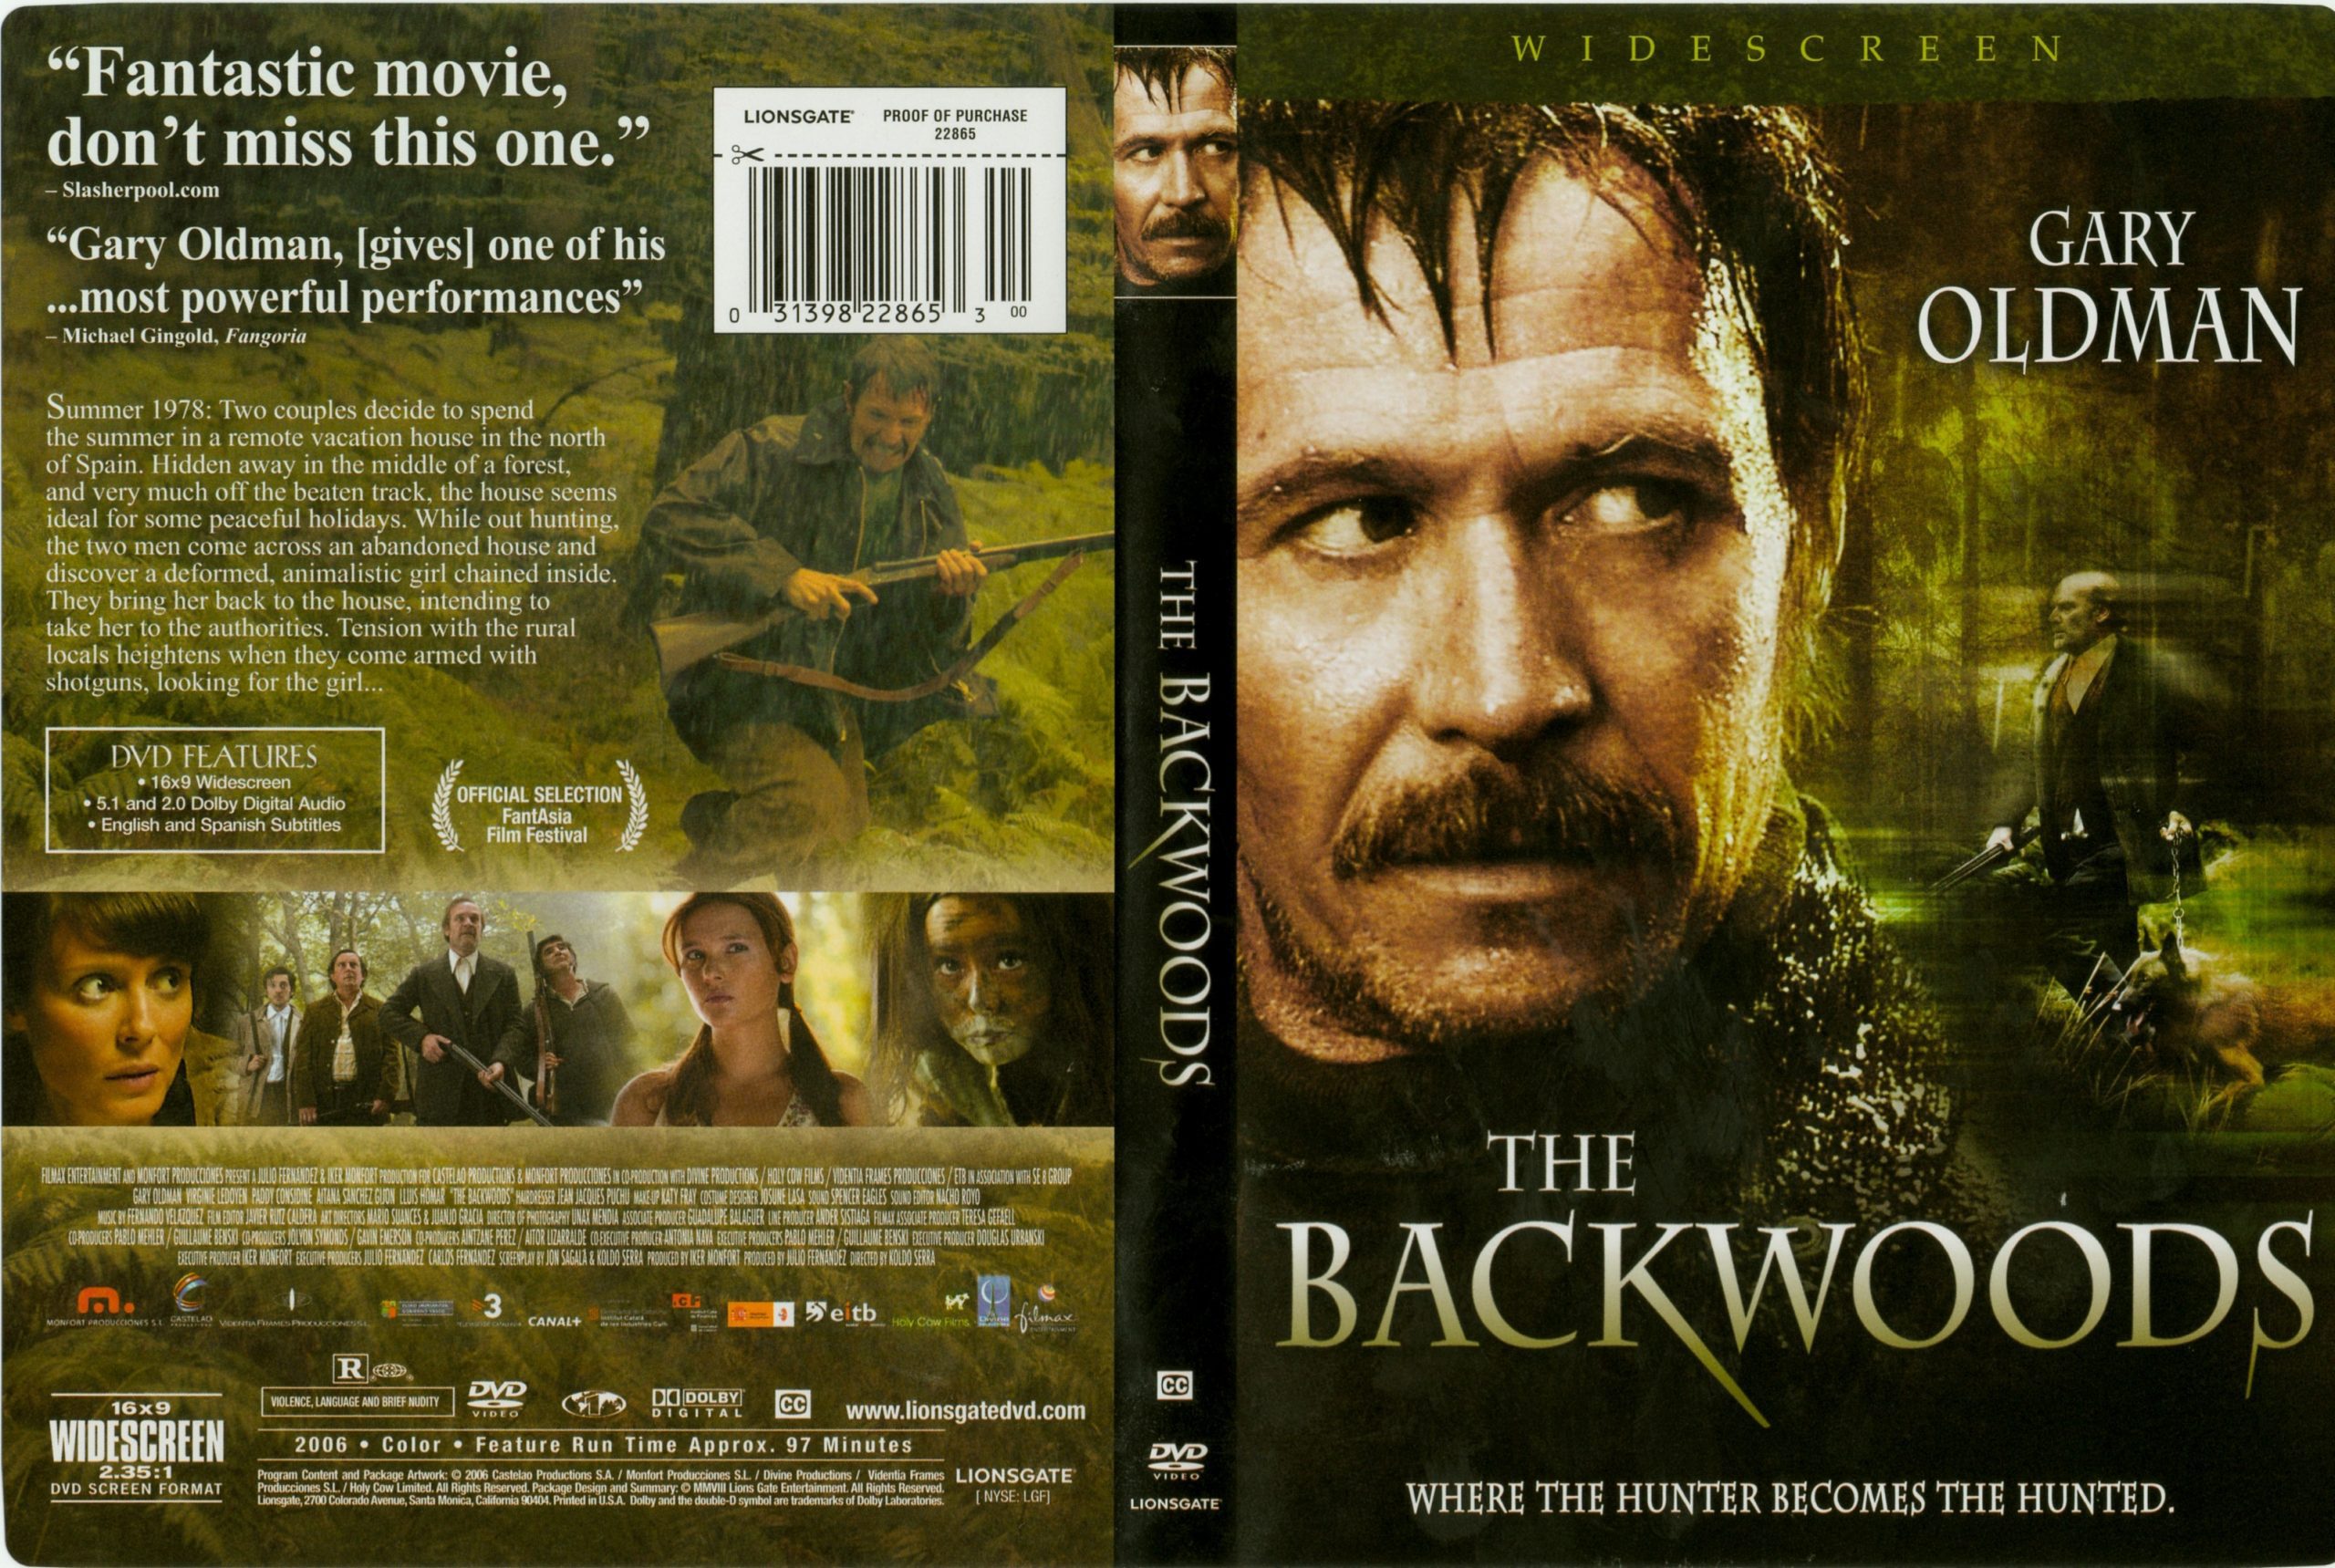 "The Backwoods" widescreen poster